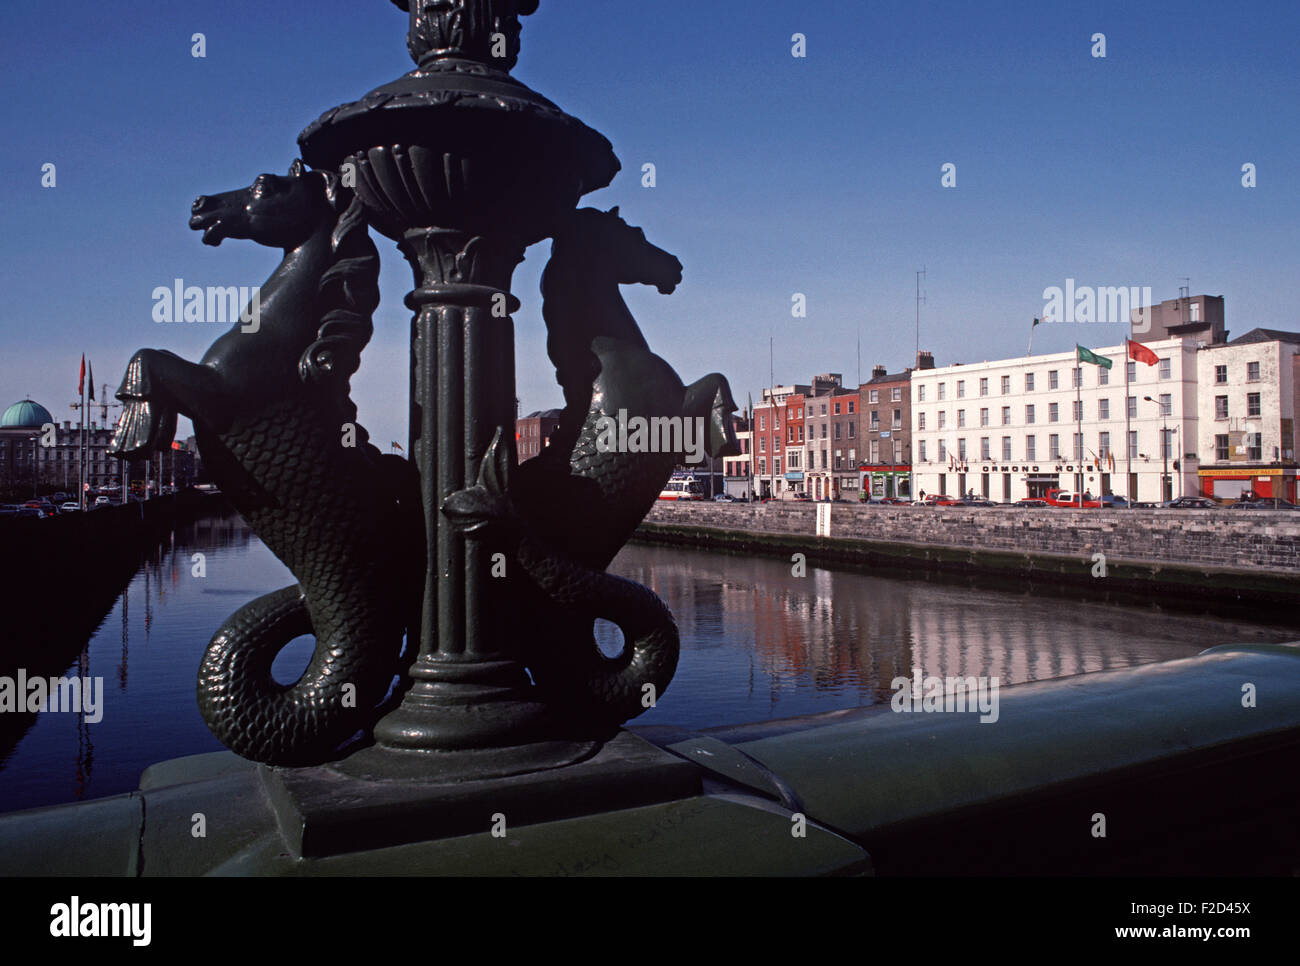 Grattan Bridge over the River Liffey with The Ormond Hotel on the lower Ormond Quay, Dublin, referred to in James Joyce 'Dubliners',  Ireland Stock Photo